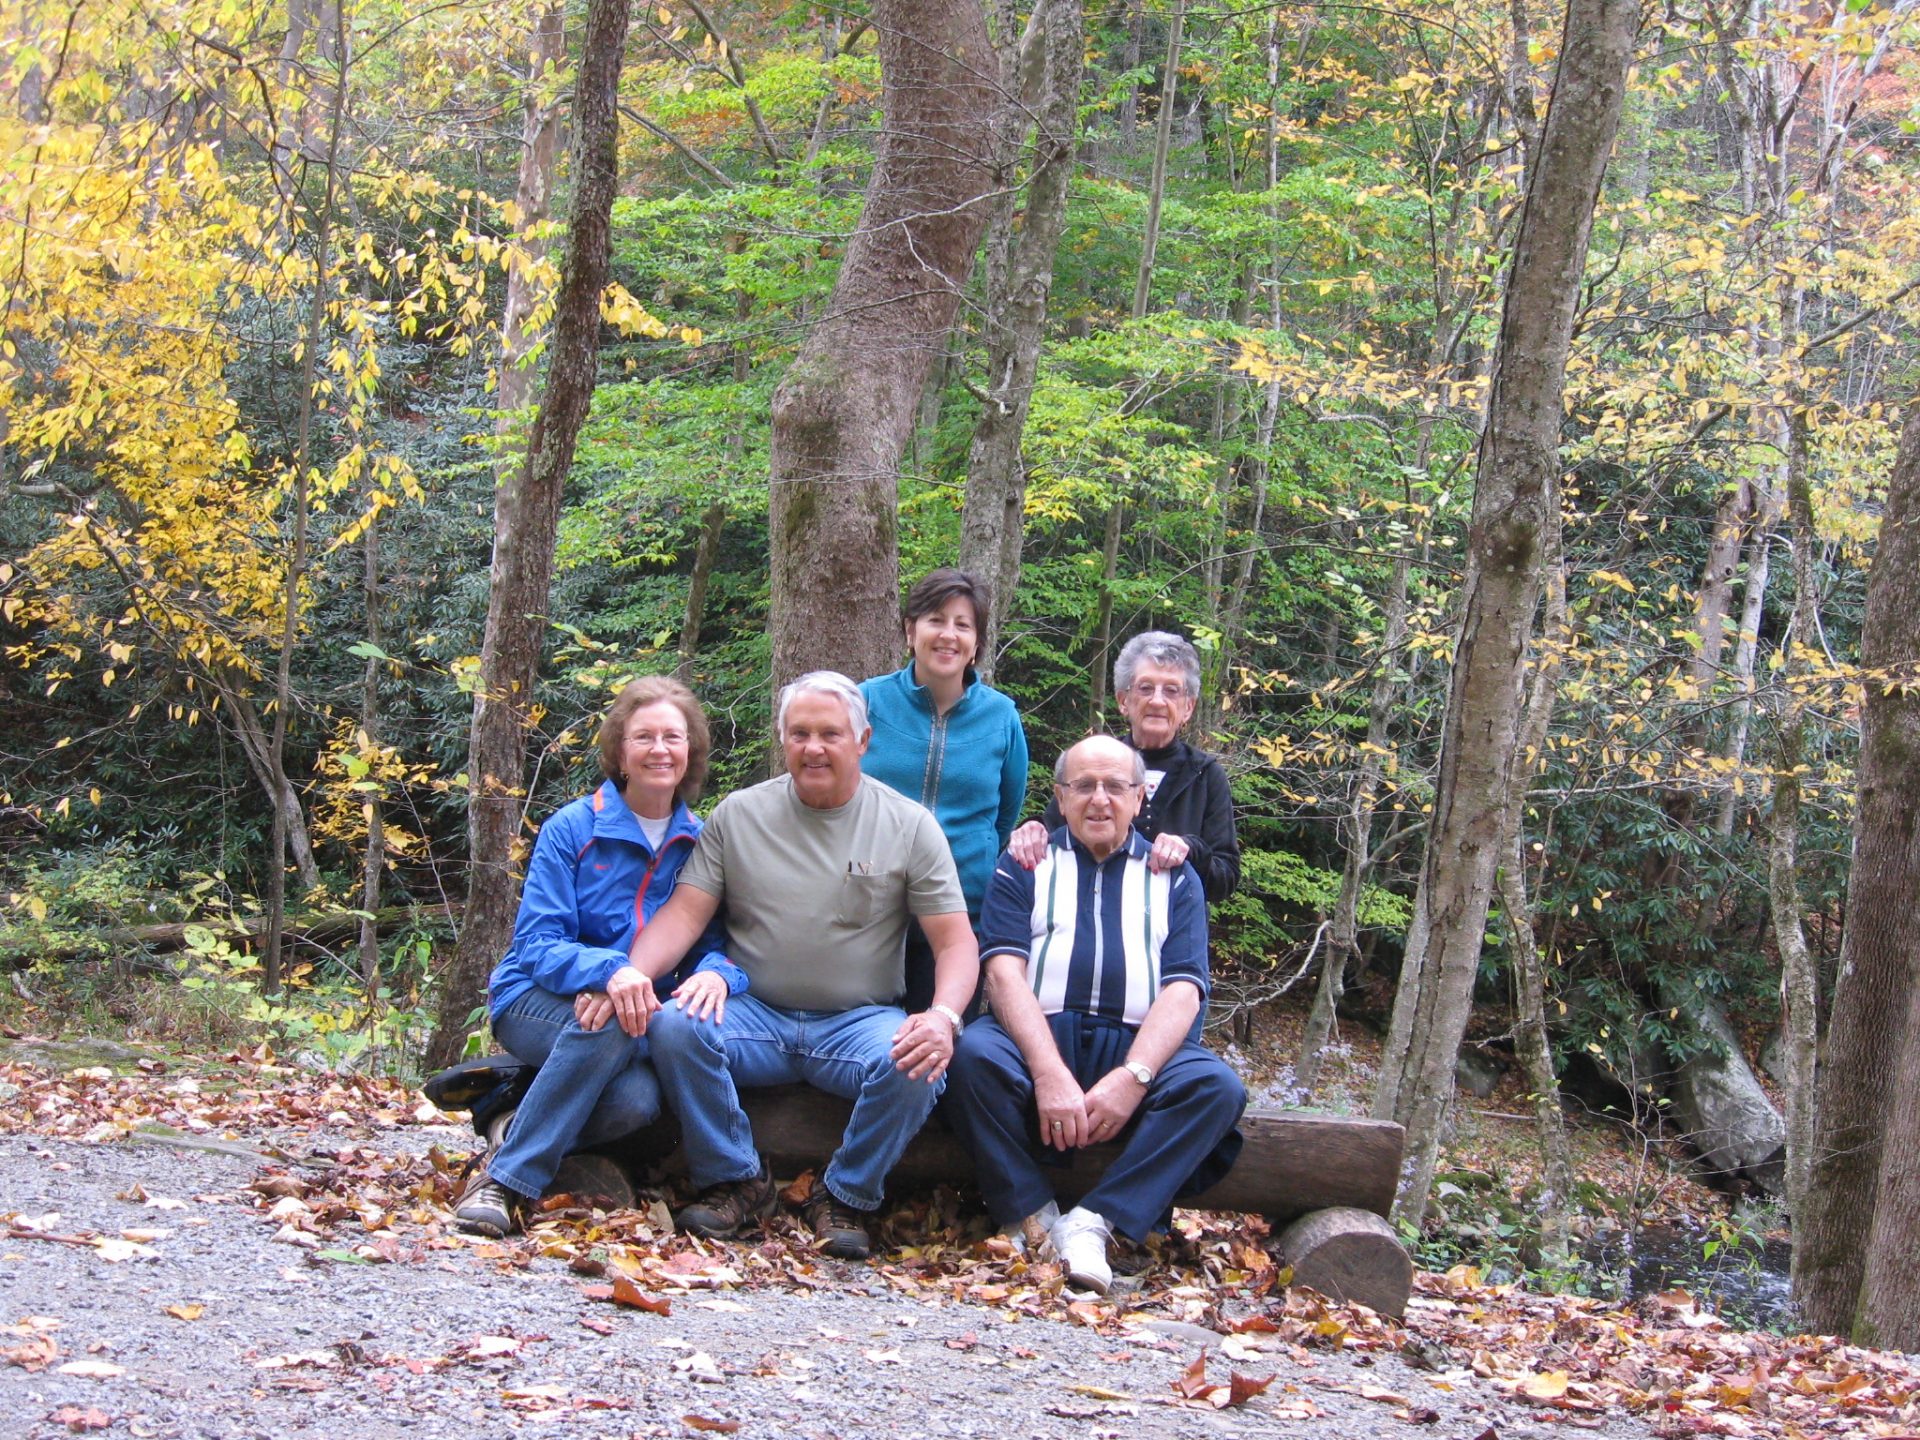 We always enjoyed spending time together in the Smoky Mountains.